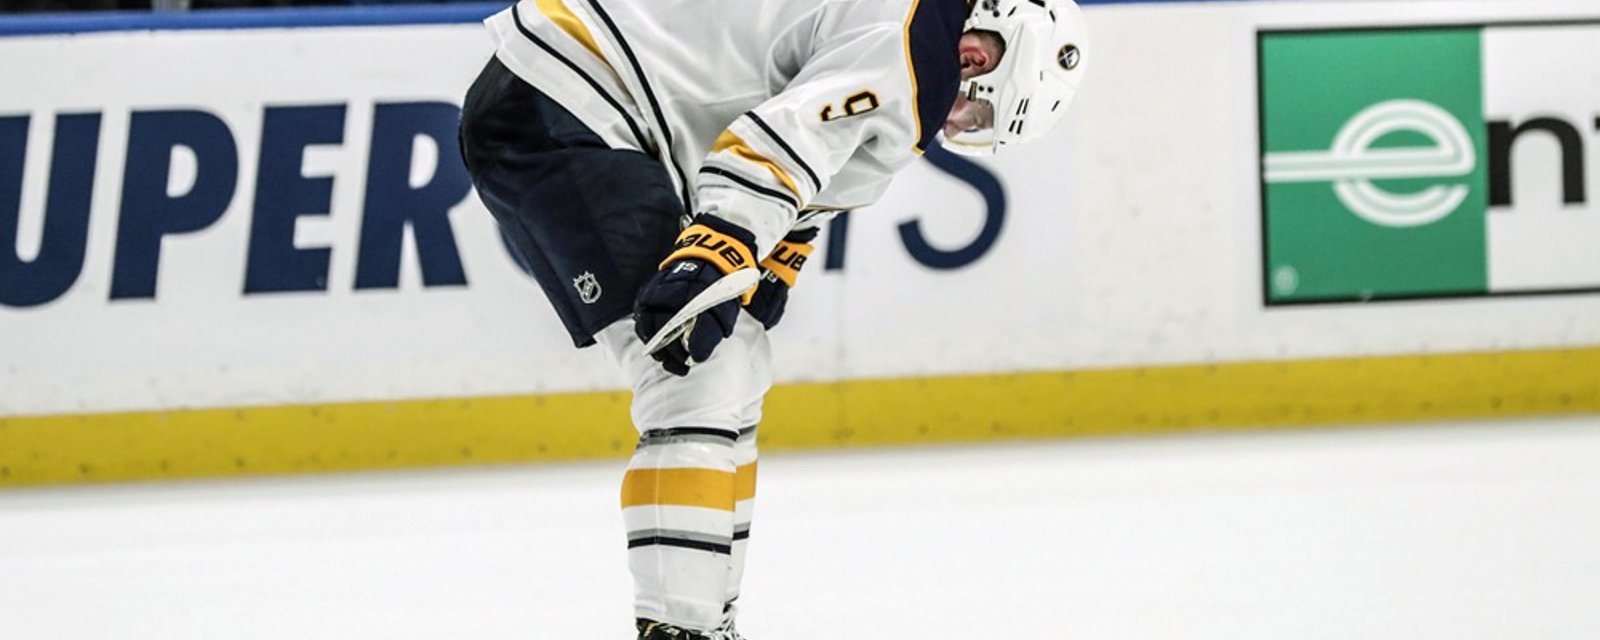 Eichel’s frustration boils over, says he’s “frustrated with the way things are going.”